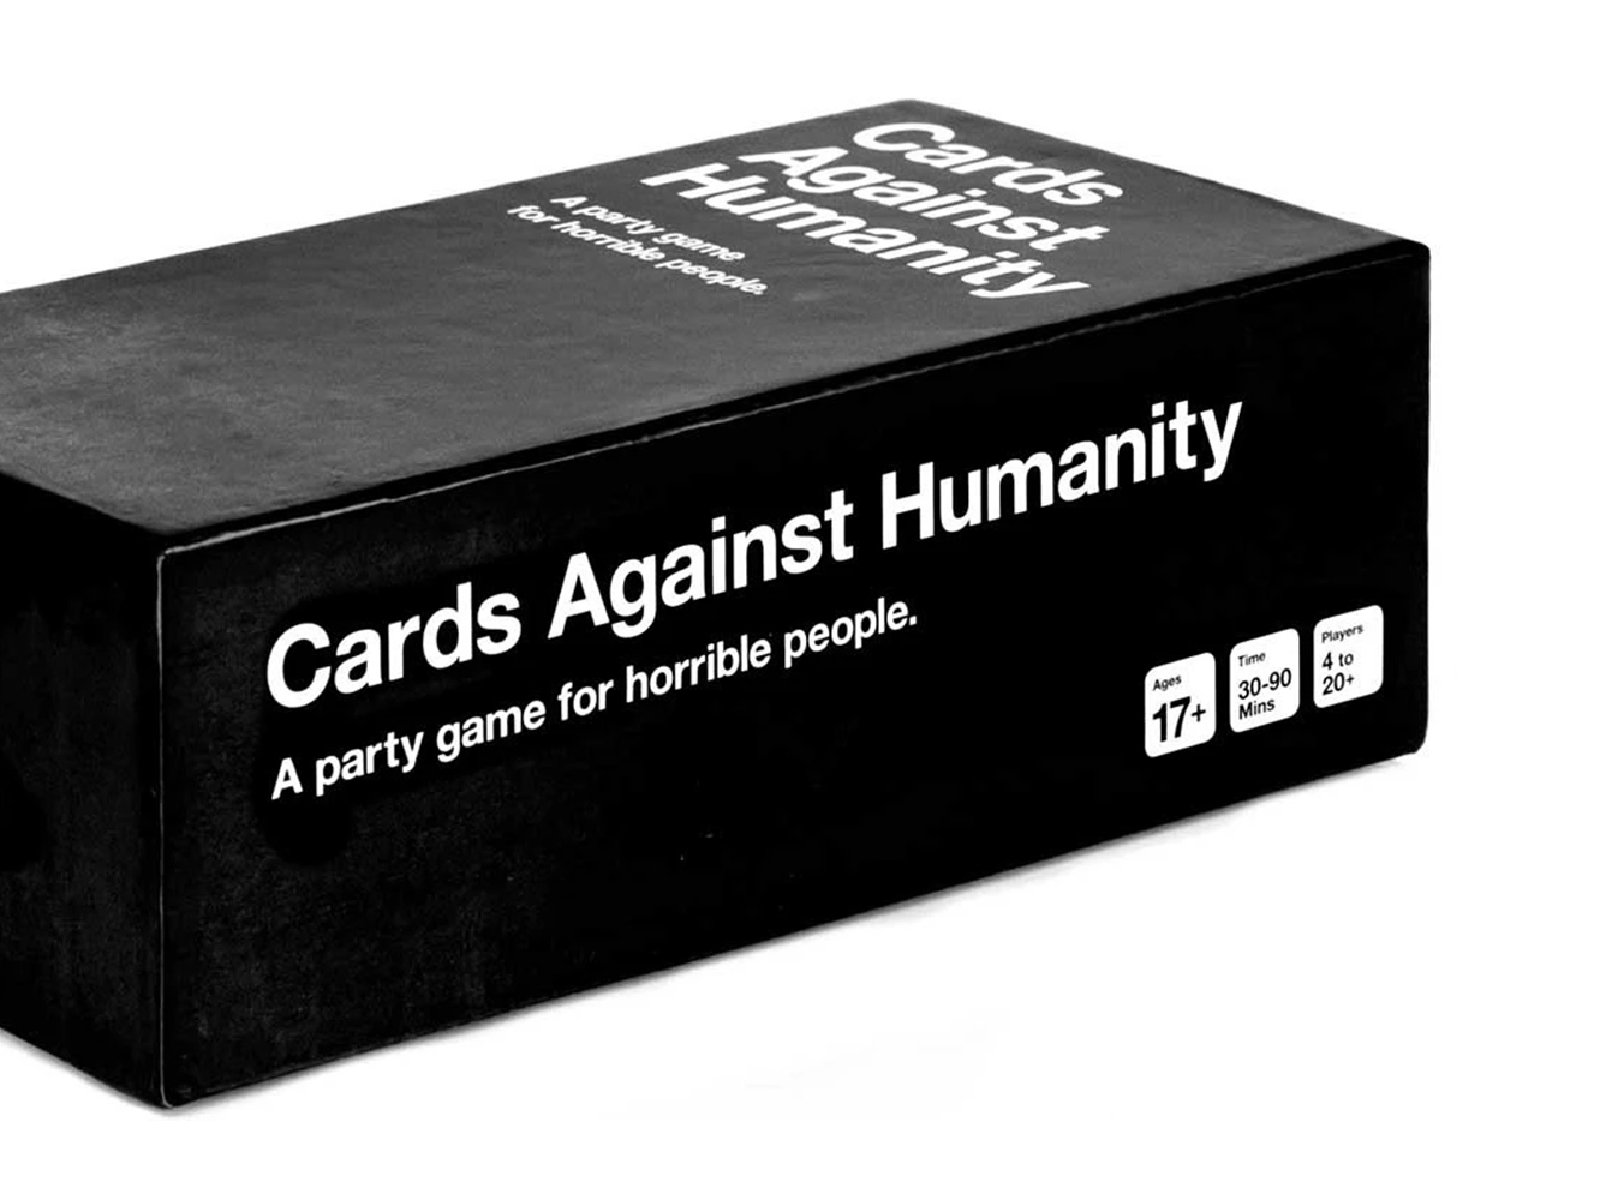 Cards Against Humanity: Video Review & How to Play With Cards Against Humanity Template